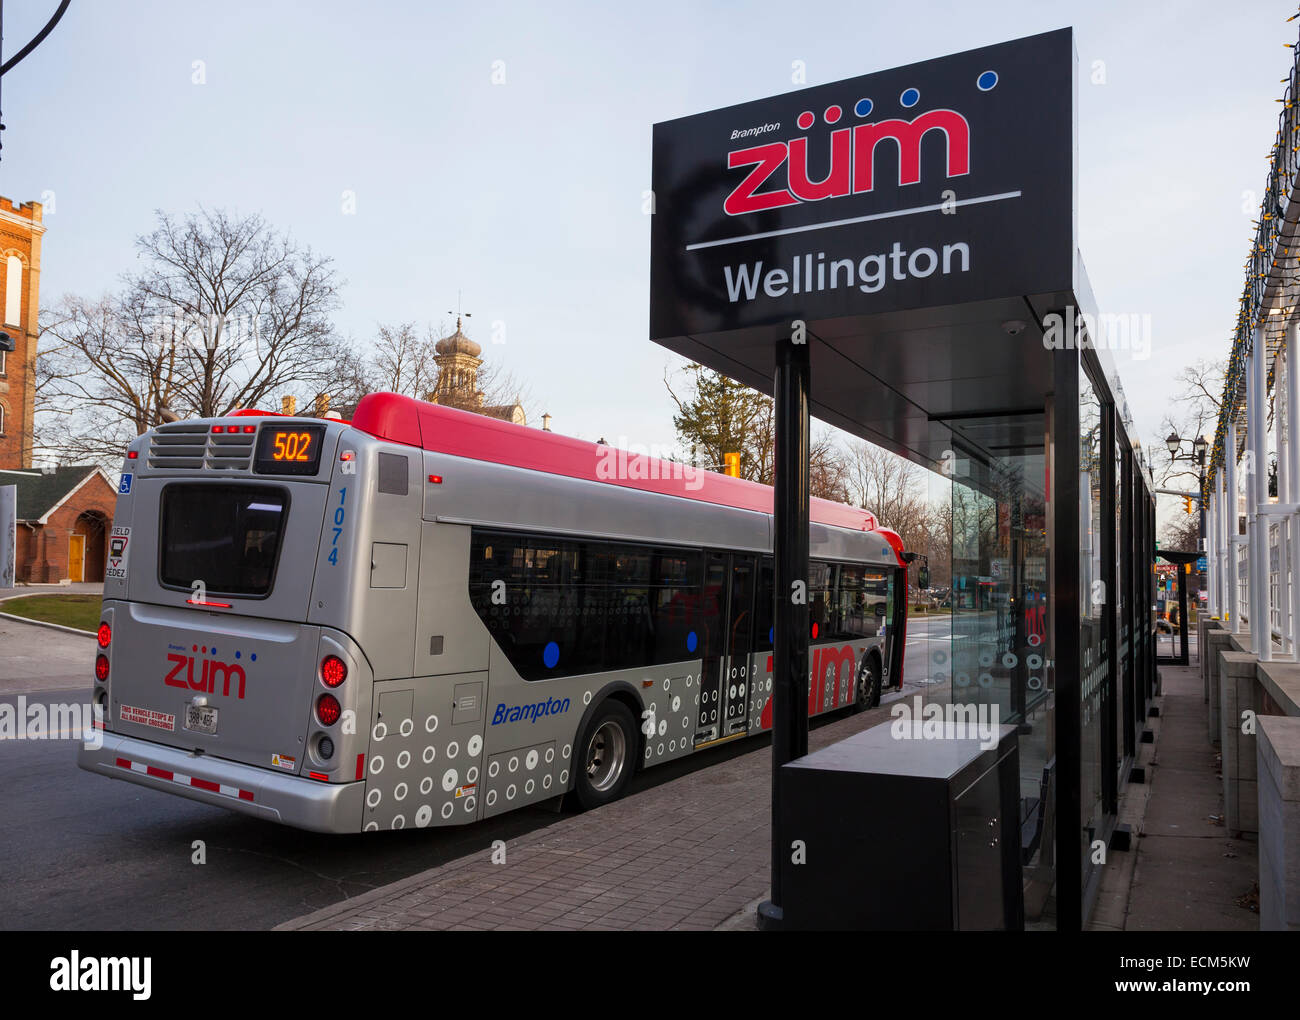 A Züm rapid transit bus waiting at a bus stop in downtown, Brampton, Ontario, Canada. Stock Photo